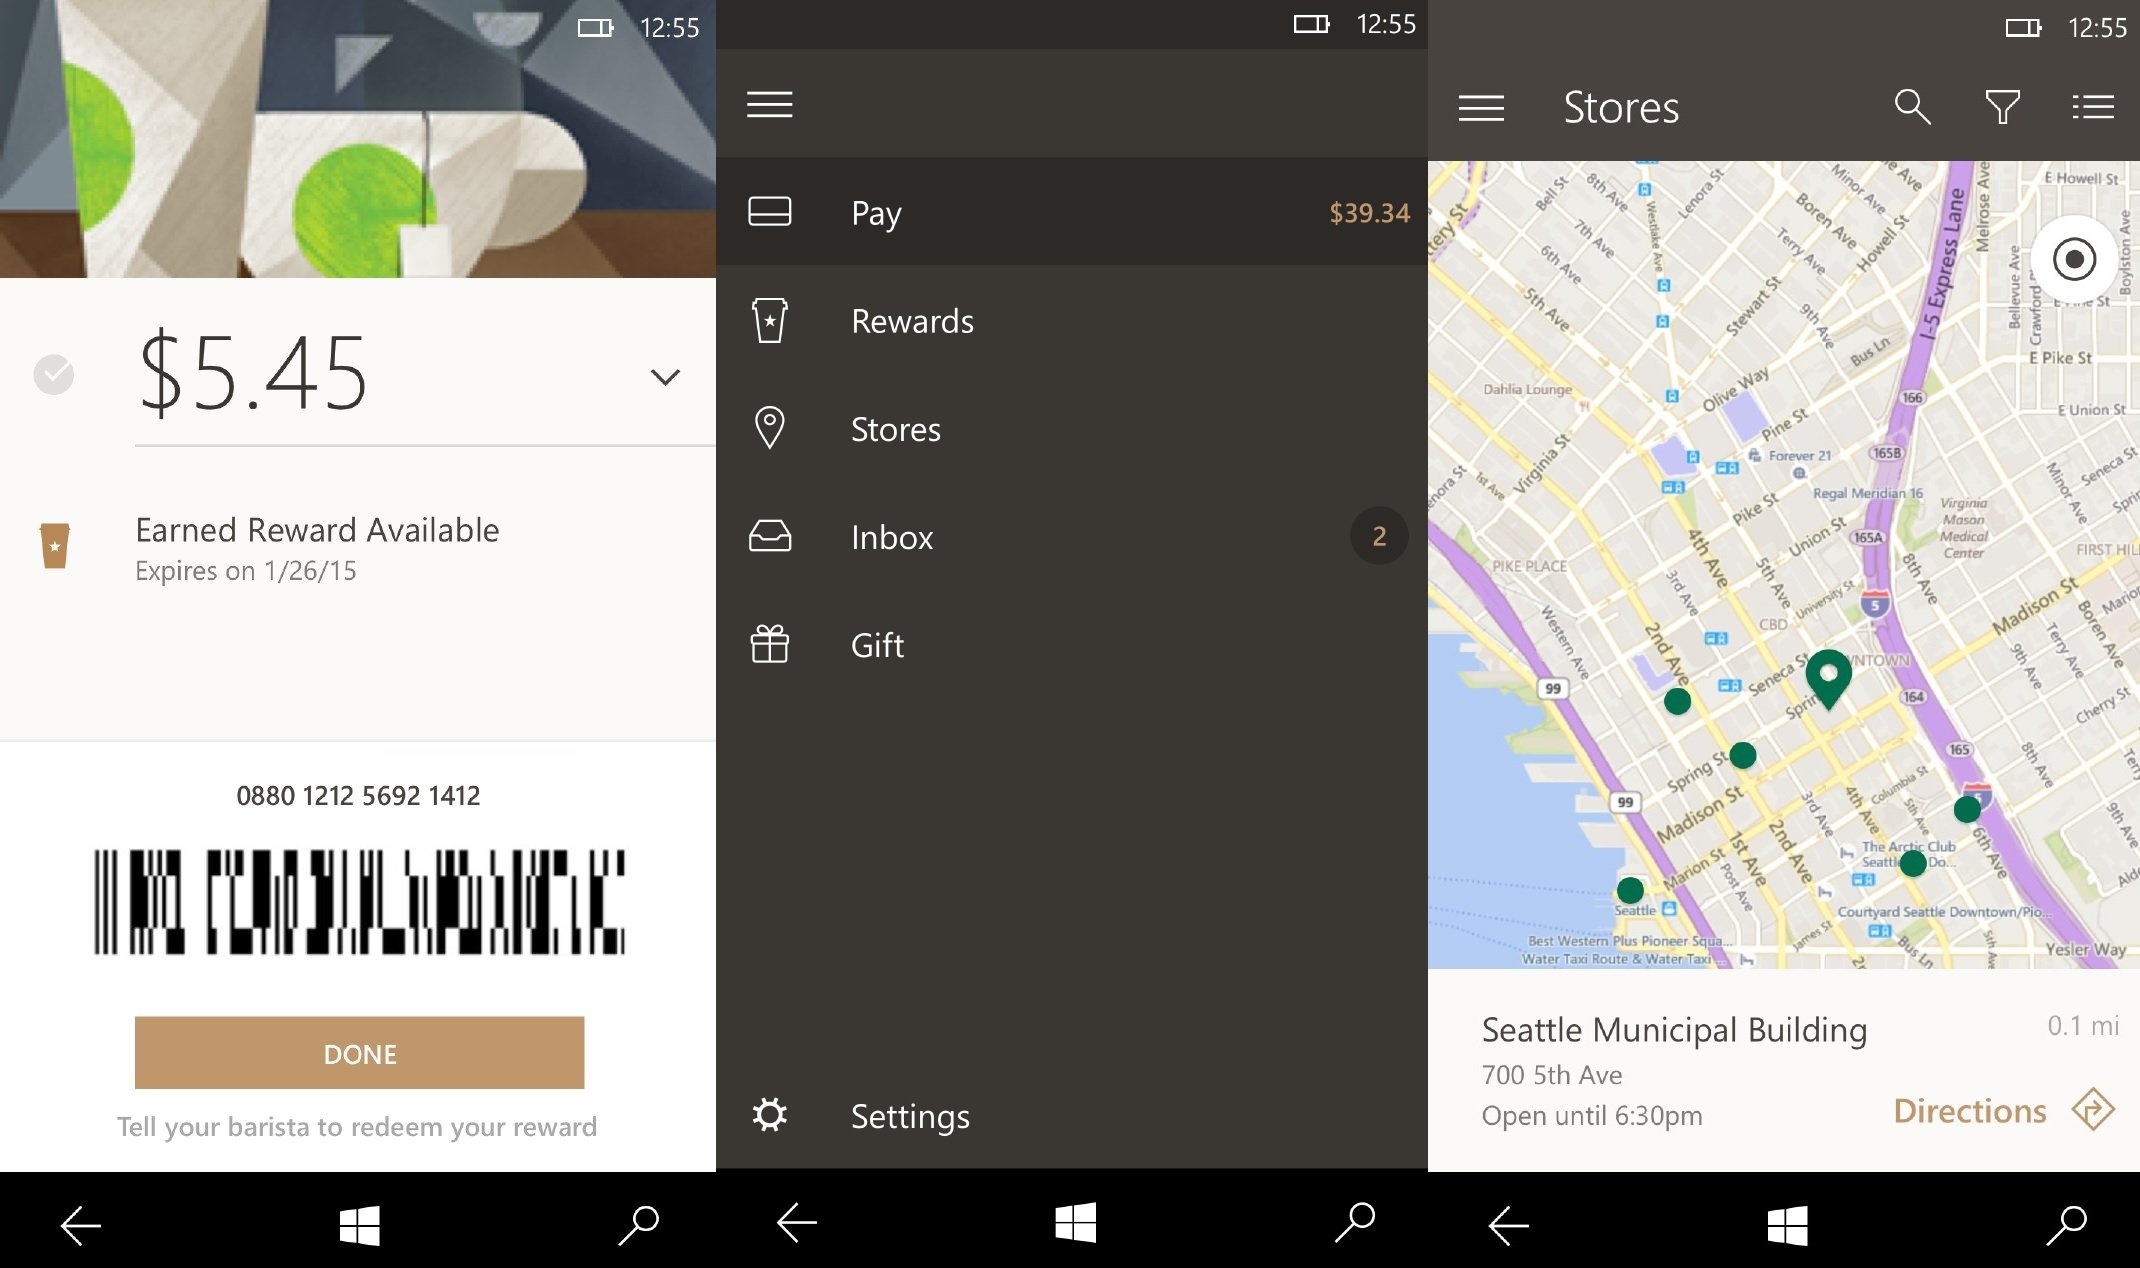 Starbucks App Now Available For Windows 10 Mobile Devices